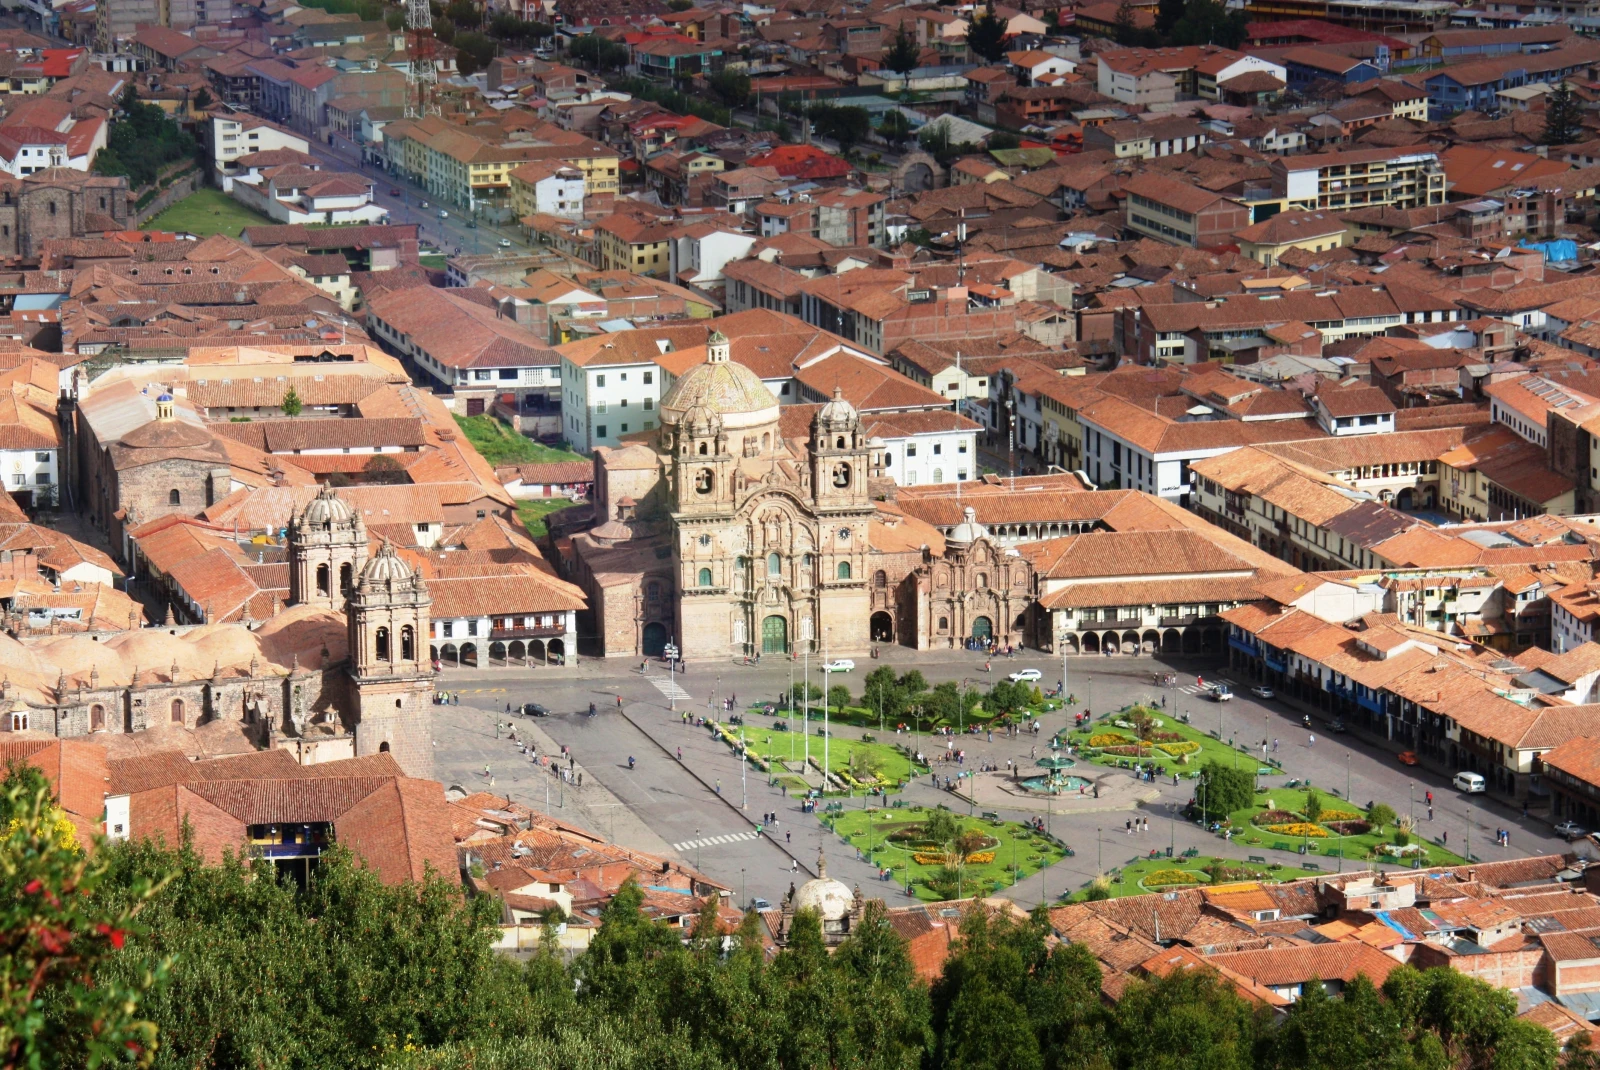 An aerial view of Cusco, Peru with orange roofed buildings and a green square.